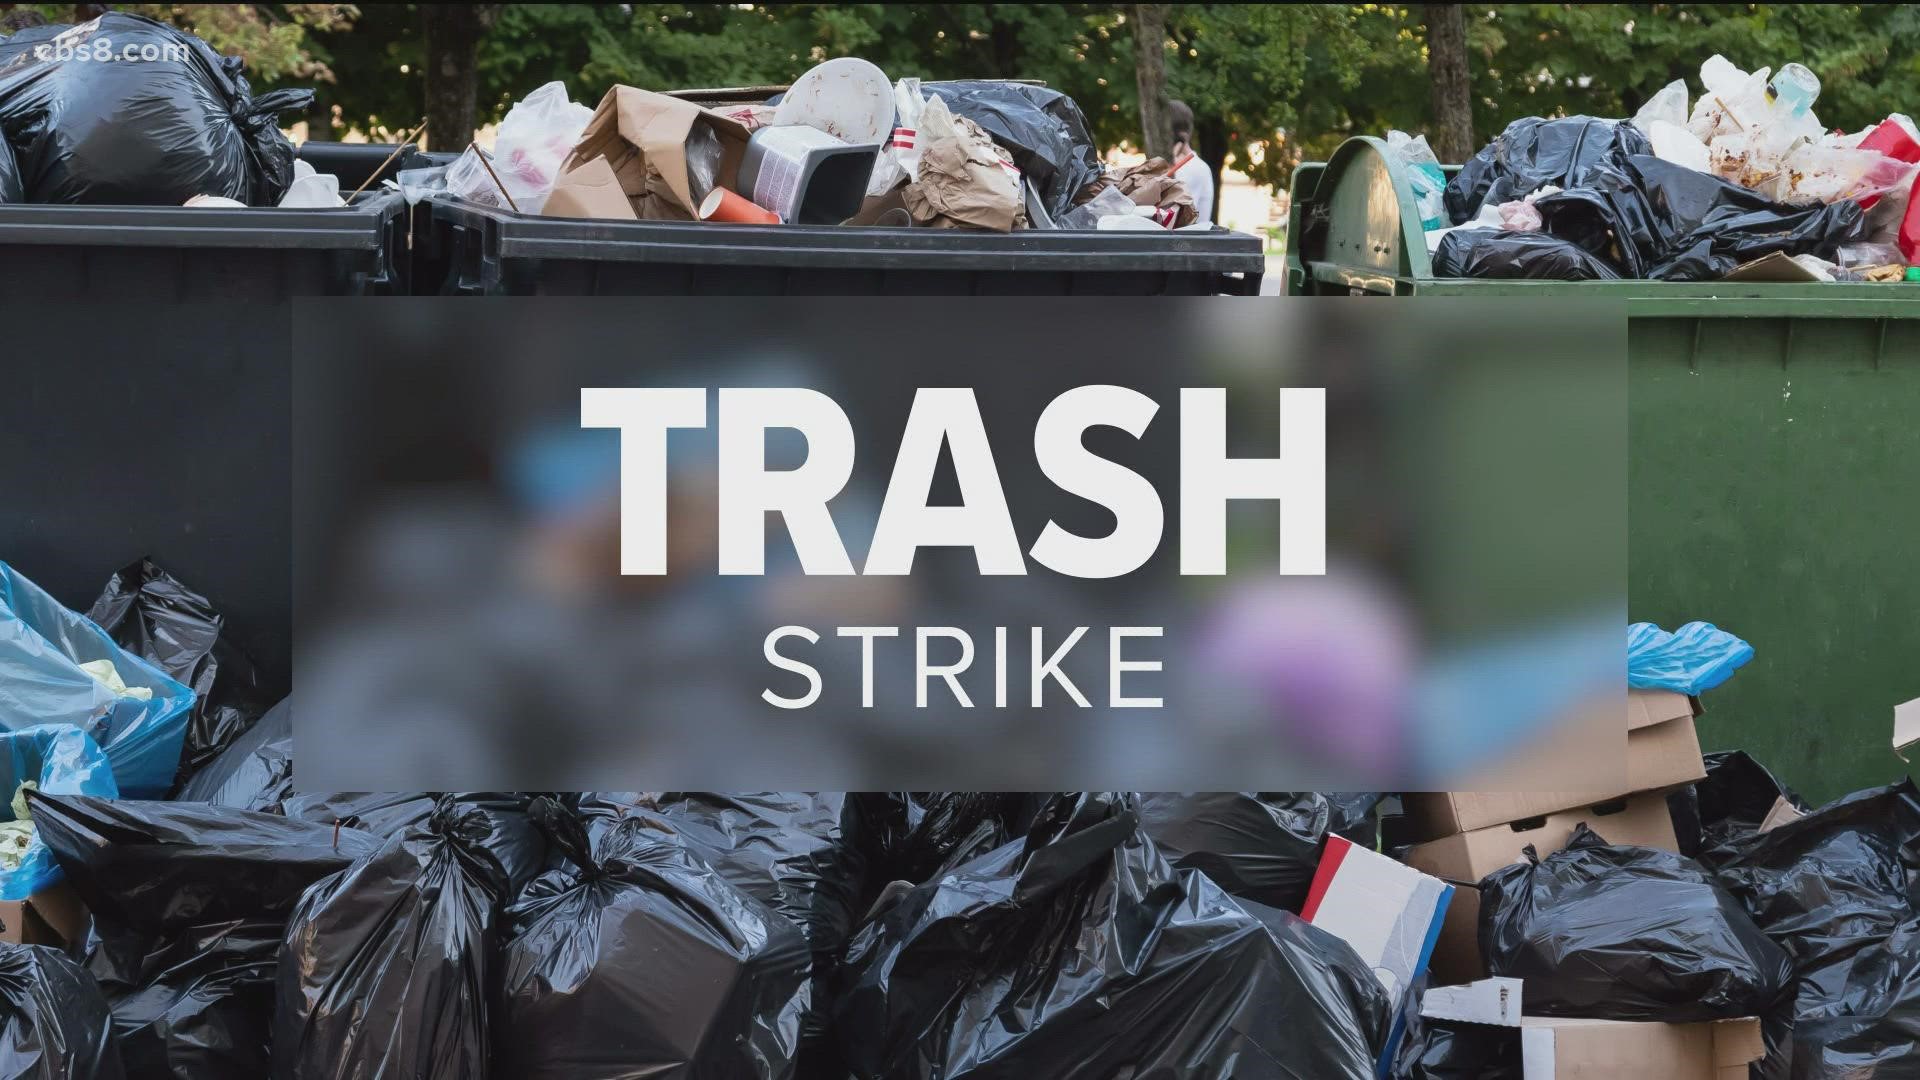 Councilmember Galvez said because Republic Services has failed to fulfill its obligation to pick up the trash, the city will now put its own measures in place.